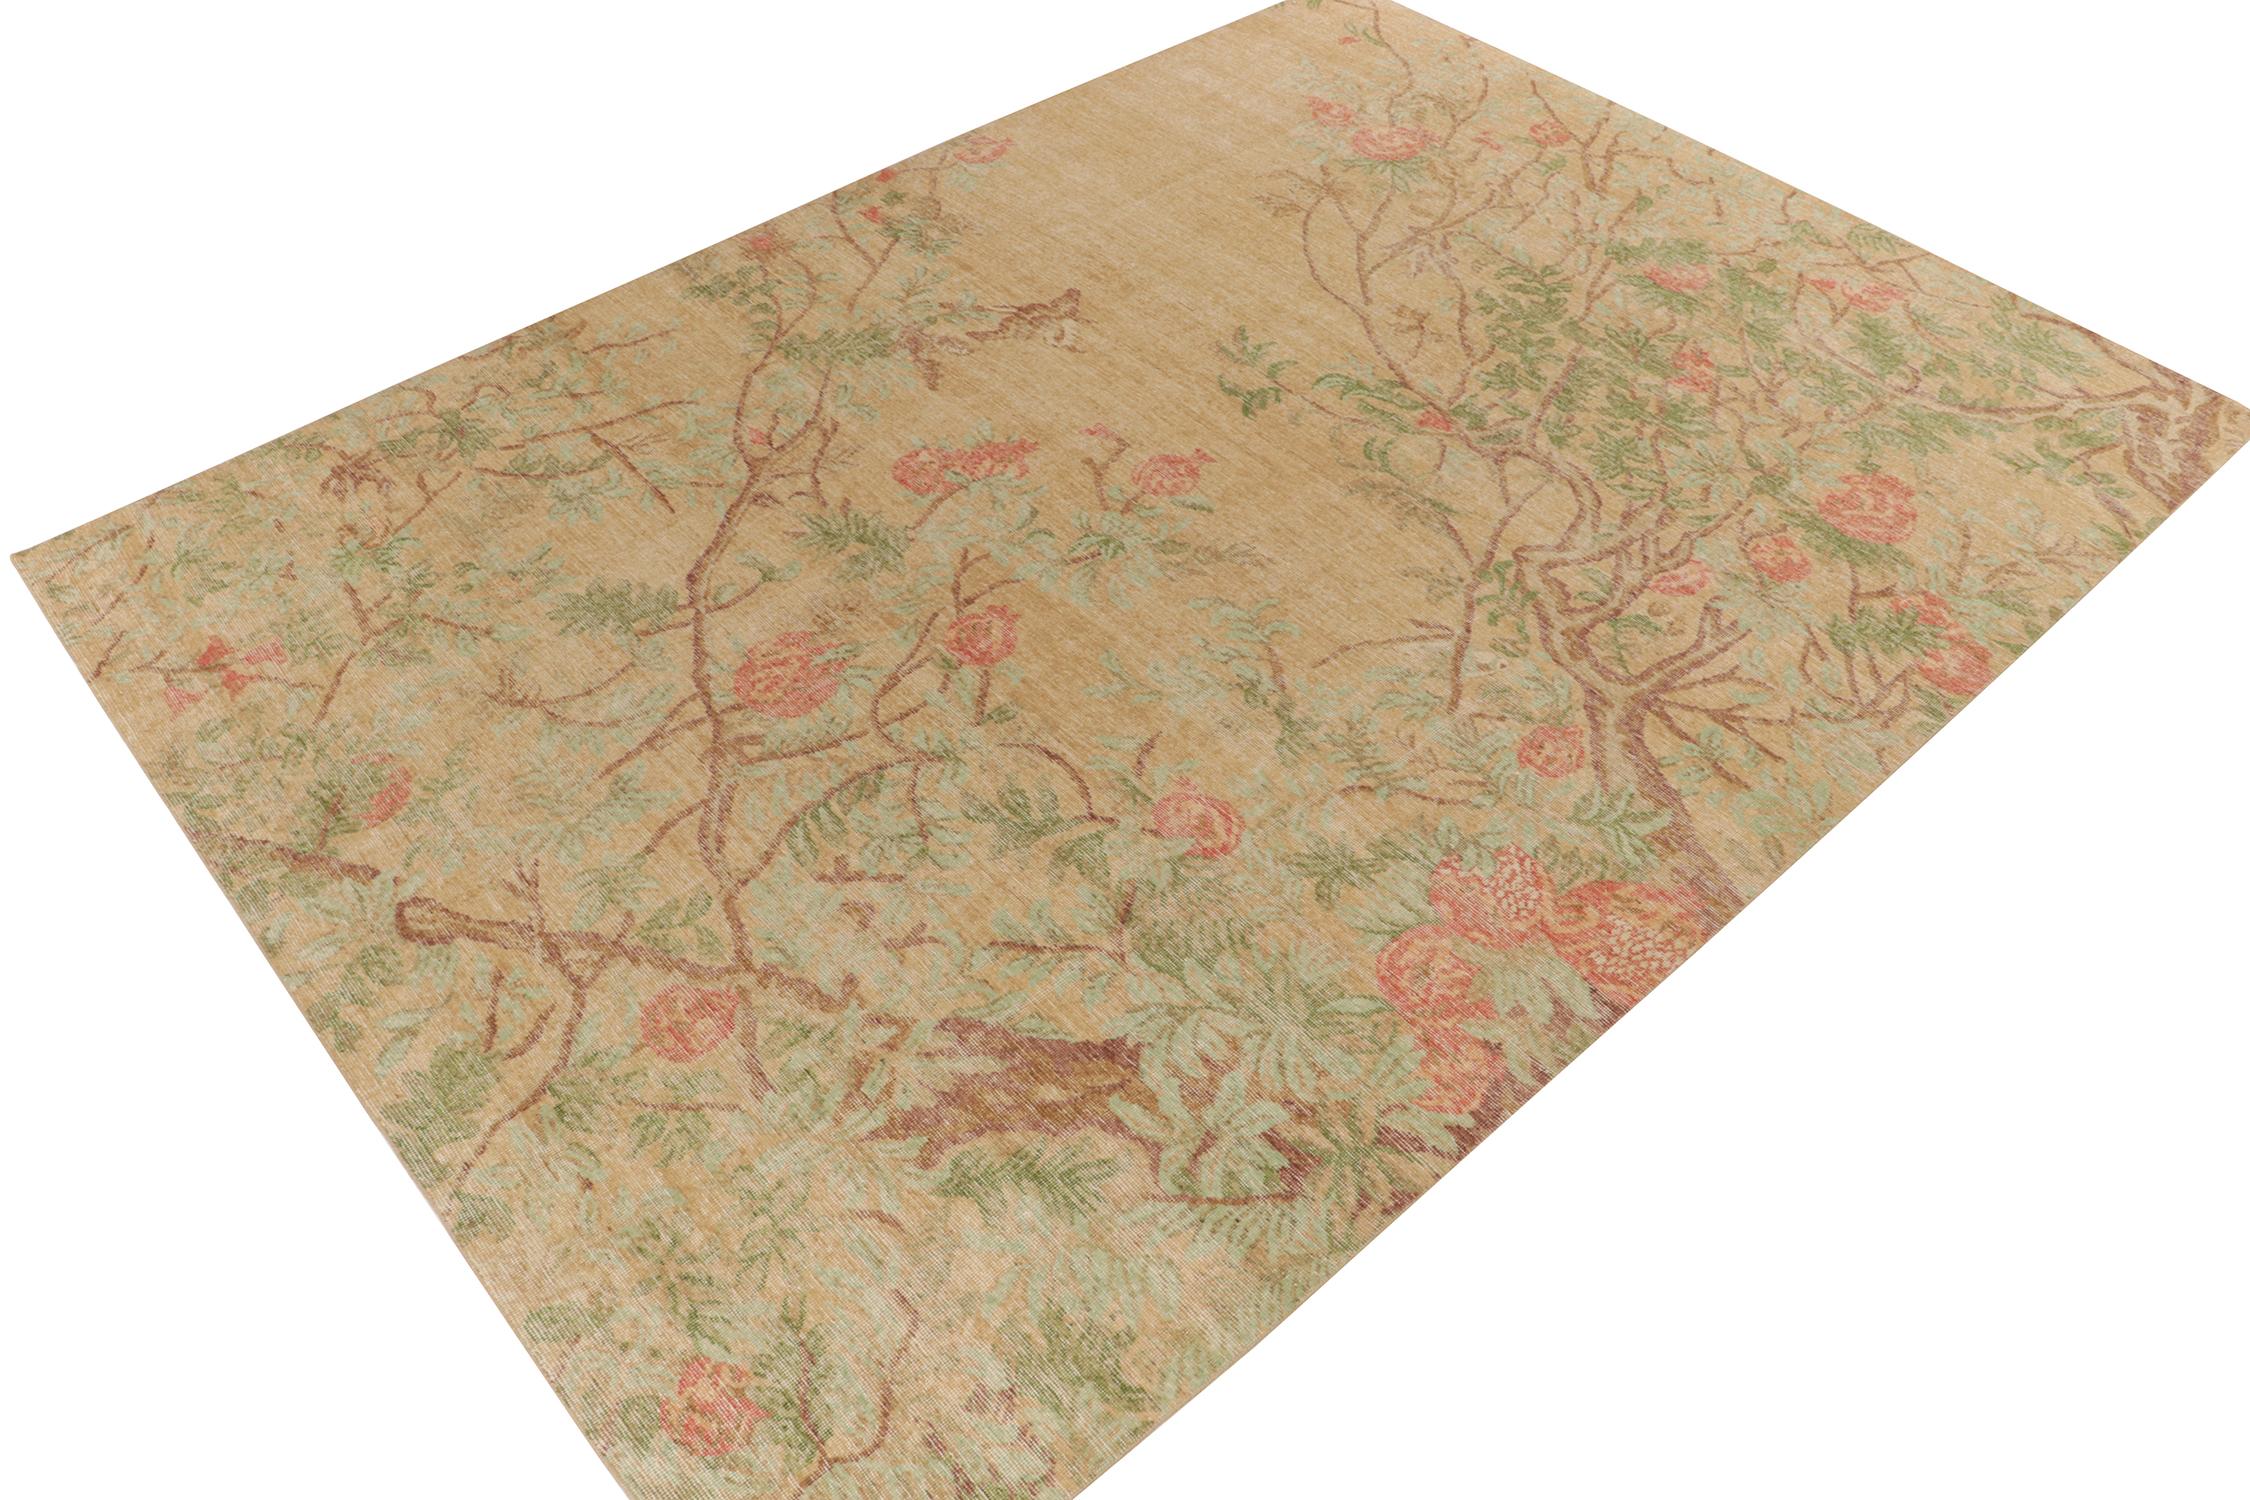 A 10x14 distressed style rug from our Homage Collection, featuring a classical floral pattern & subtle animal pictorials in red, gold, brown and forest green tones—transitioning beautifully with the low-pile texture for an alluring shabby chic